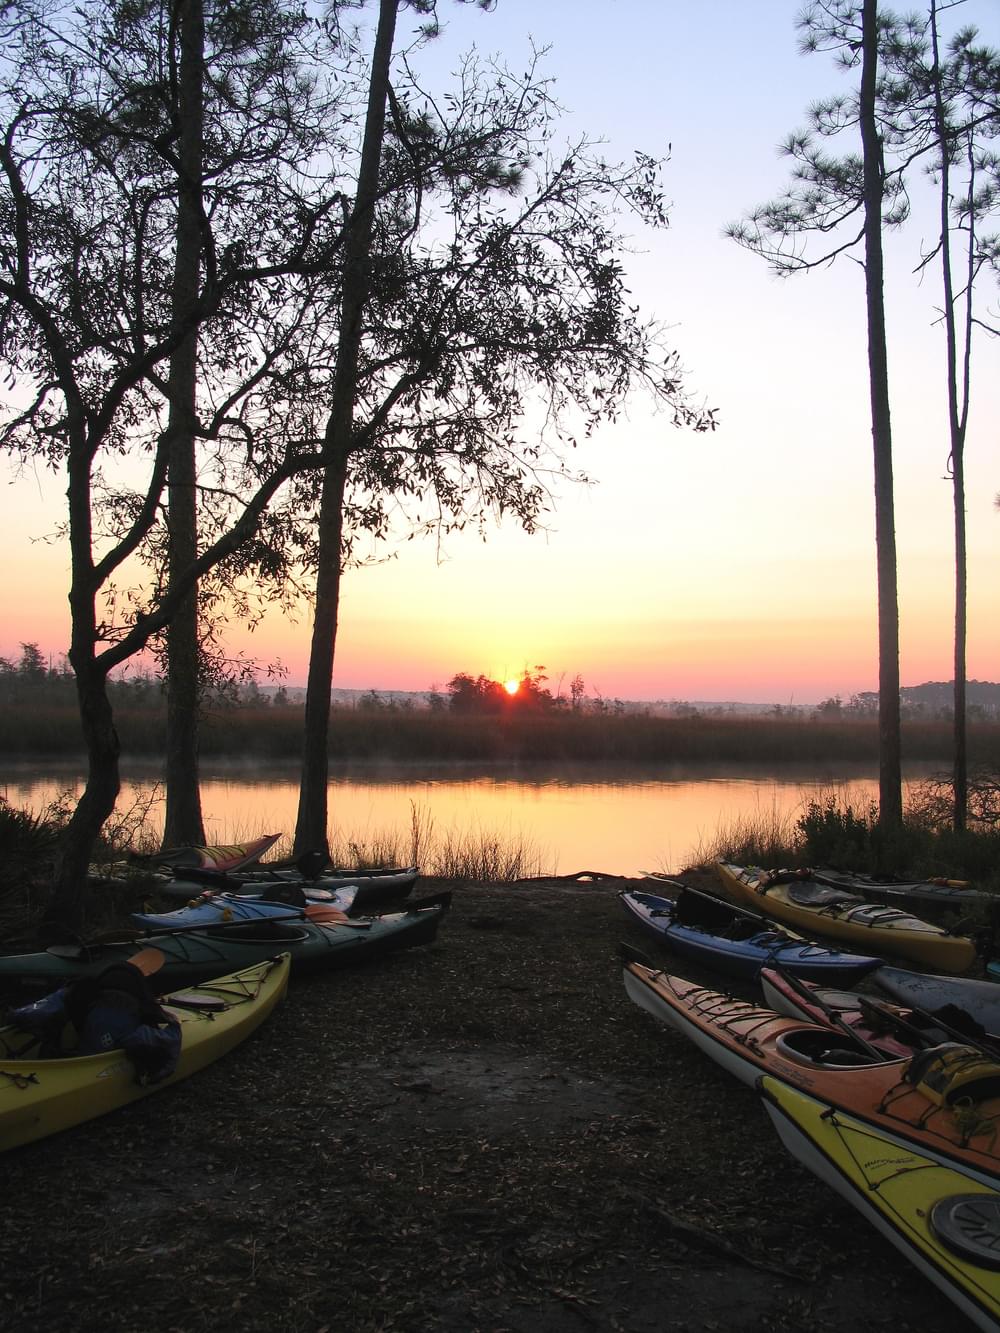 Sunrise at the campsite with kayaks on Segment 5 (Crooked River/St. Marks Refuge) of the Florida Circumnavigational Saltwater Paddling Trail